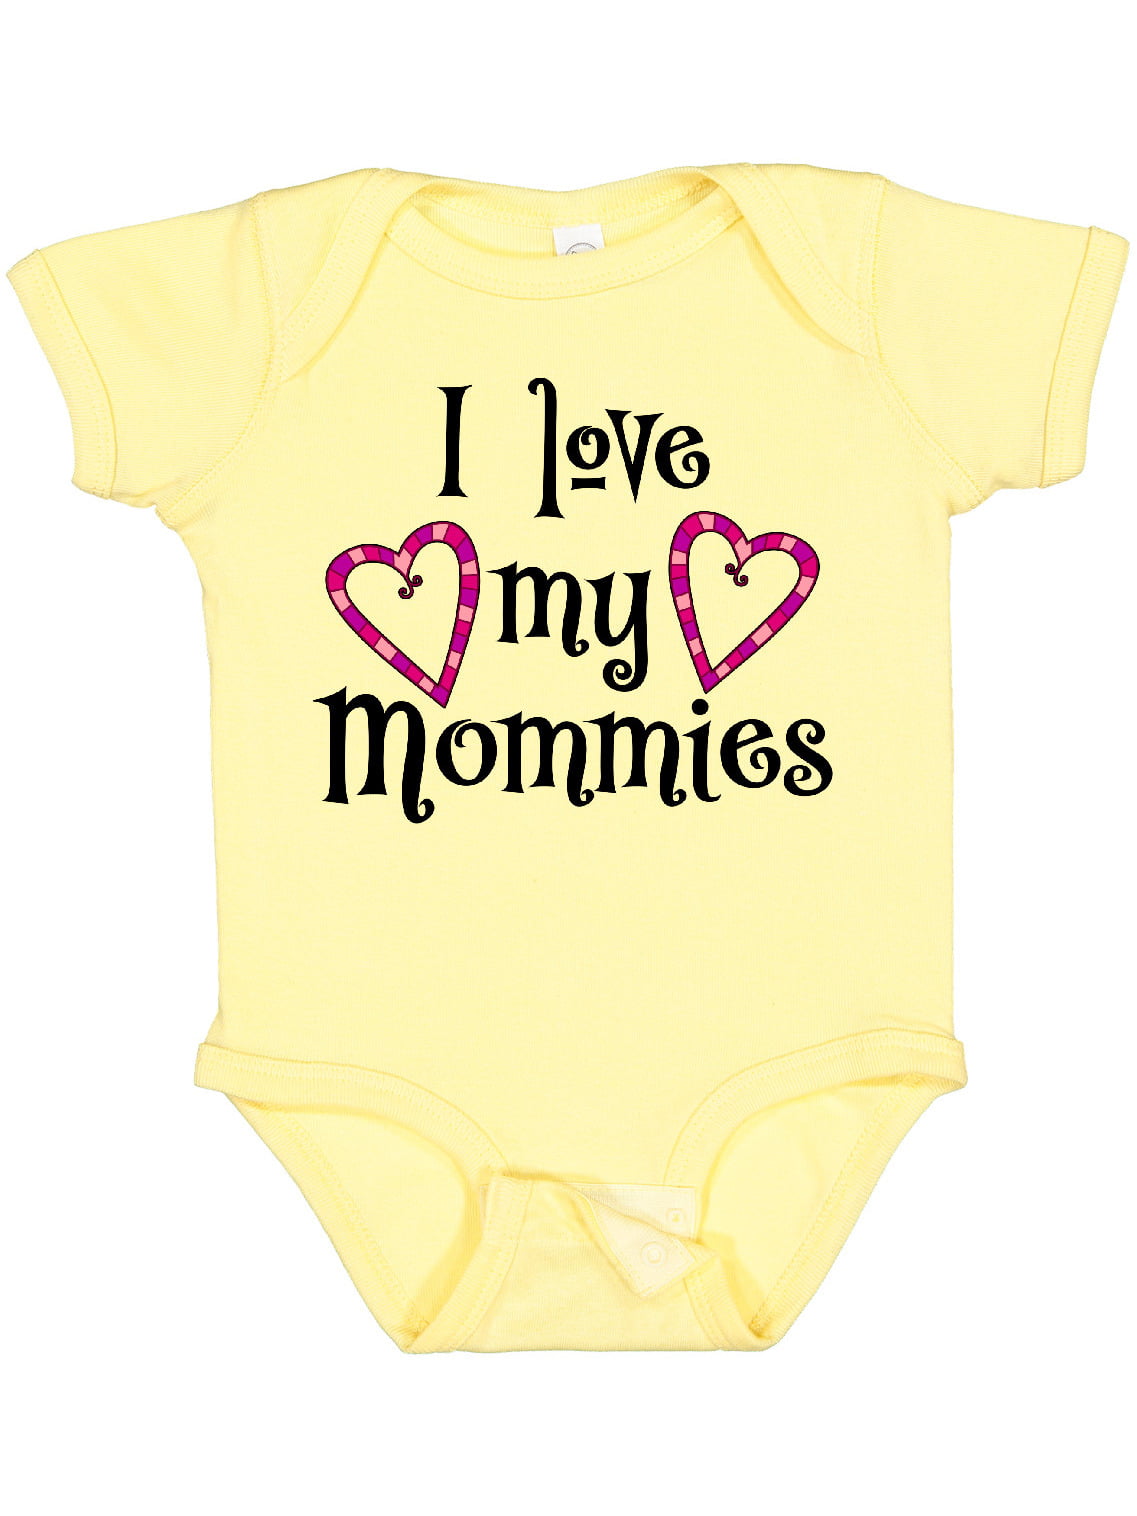 Dad's Fishing Buddy - Pack My Diapers, I'm Going Fishing with Daddy - Cute  One-Piece Infant Baby Bodysuit